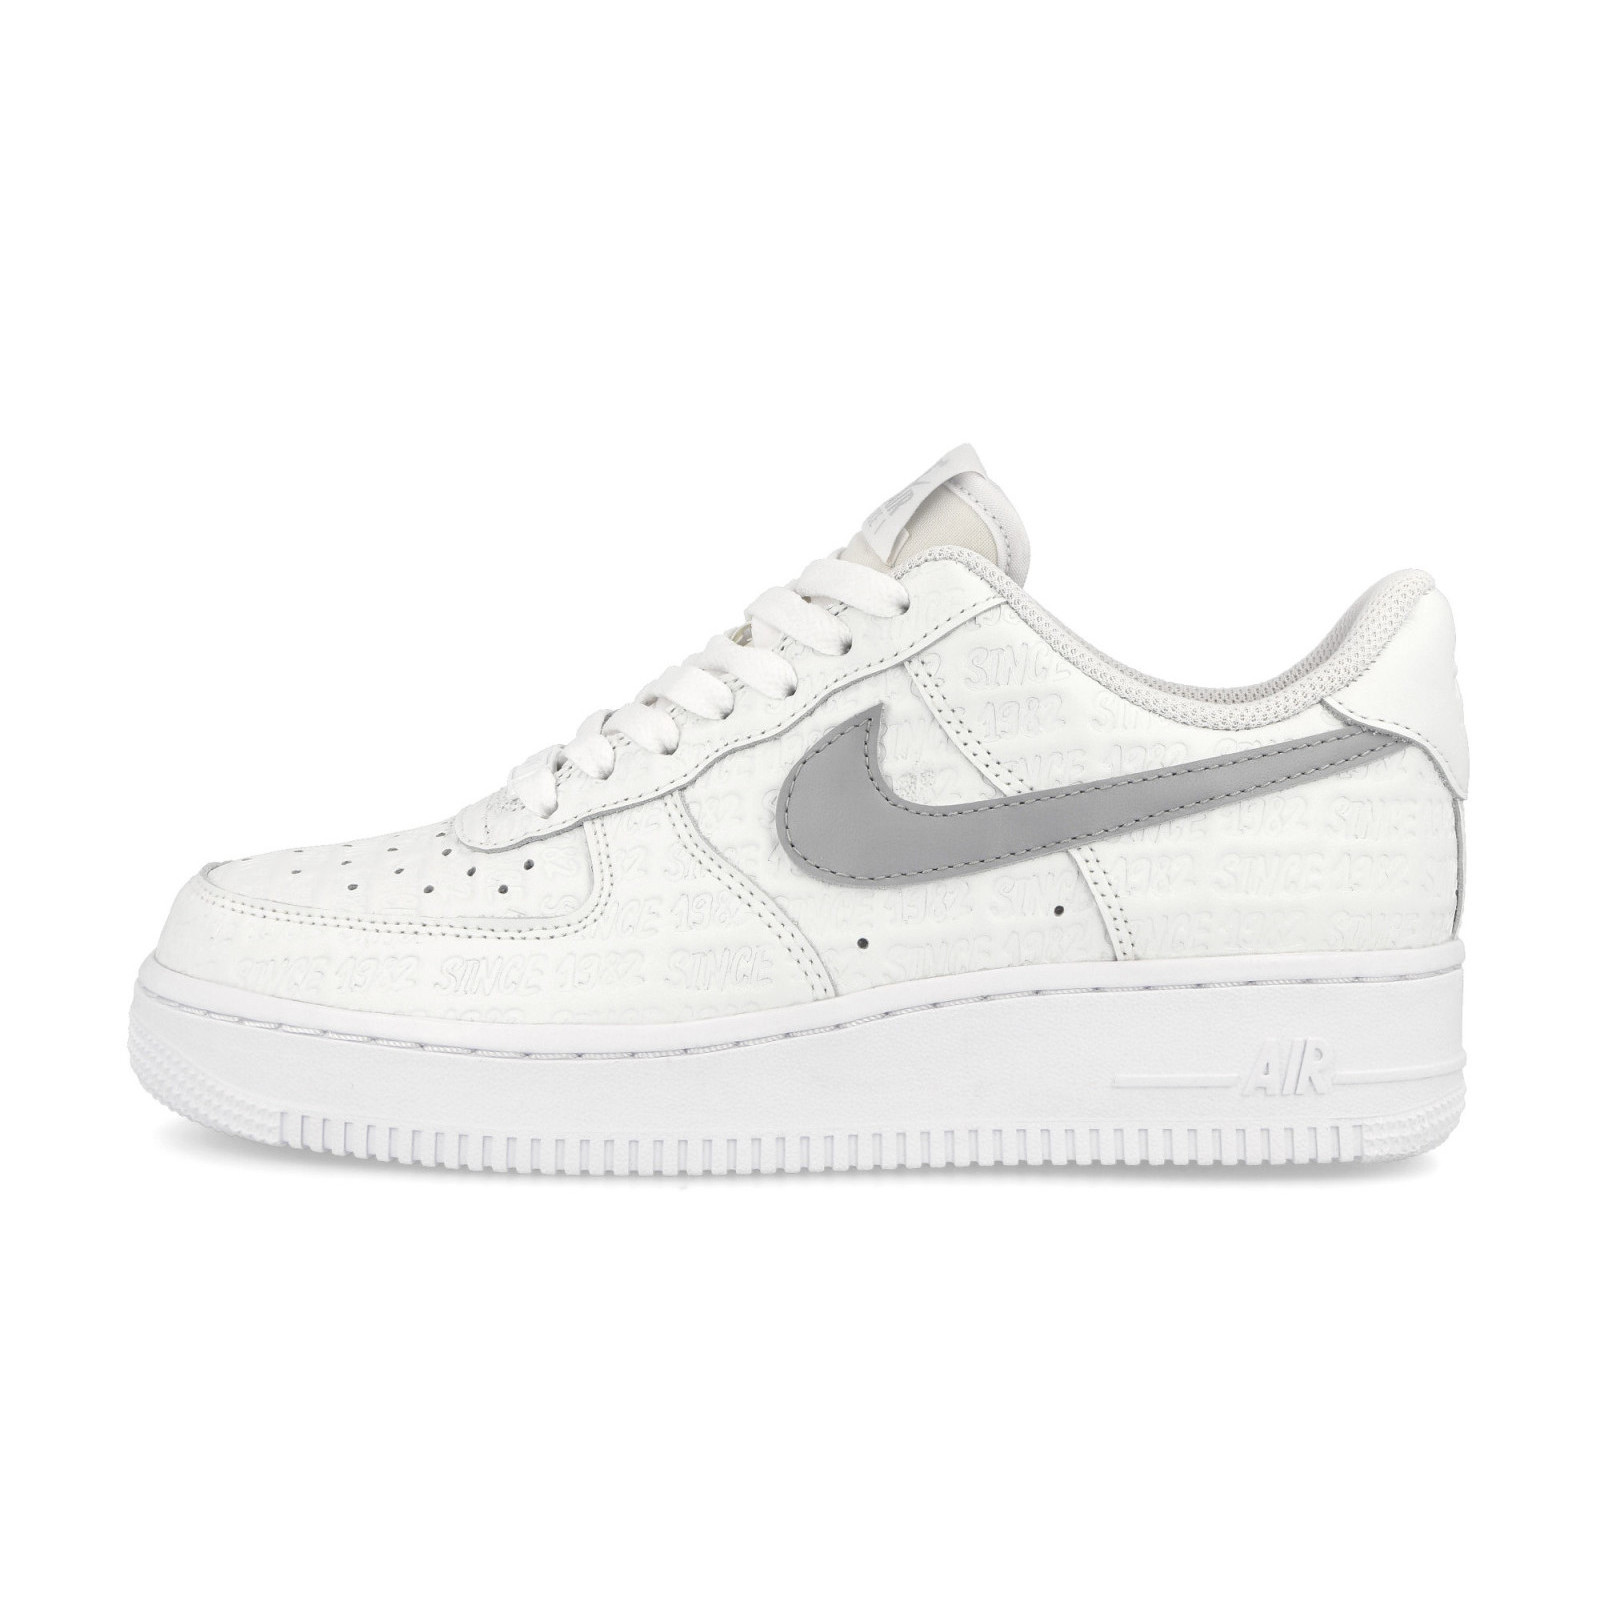 Nike Air Force 1 07 Low
White / Wolf Grey